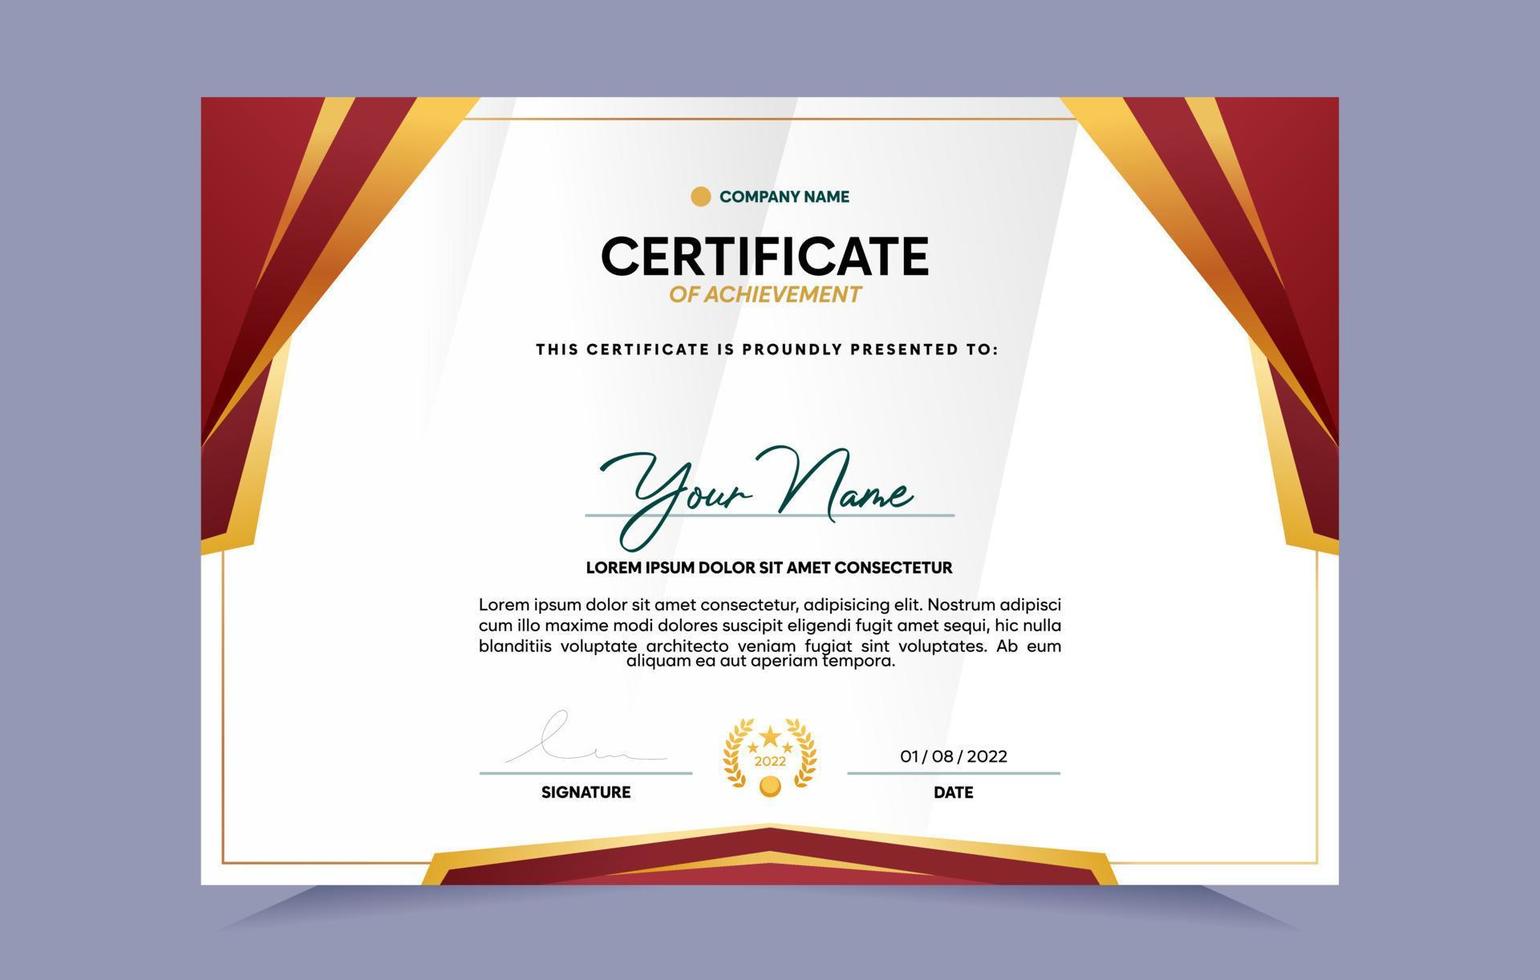 Red and gold certificate of achievement template set with gold badge and border. For award, business, and education needs. Vector Illustration